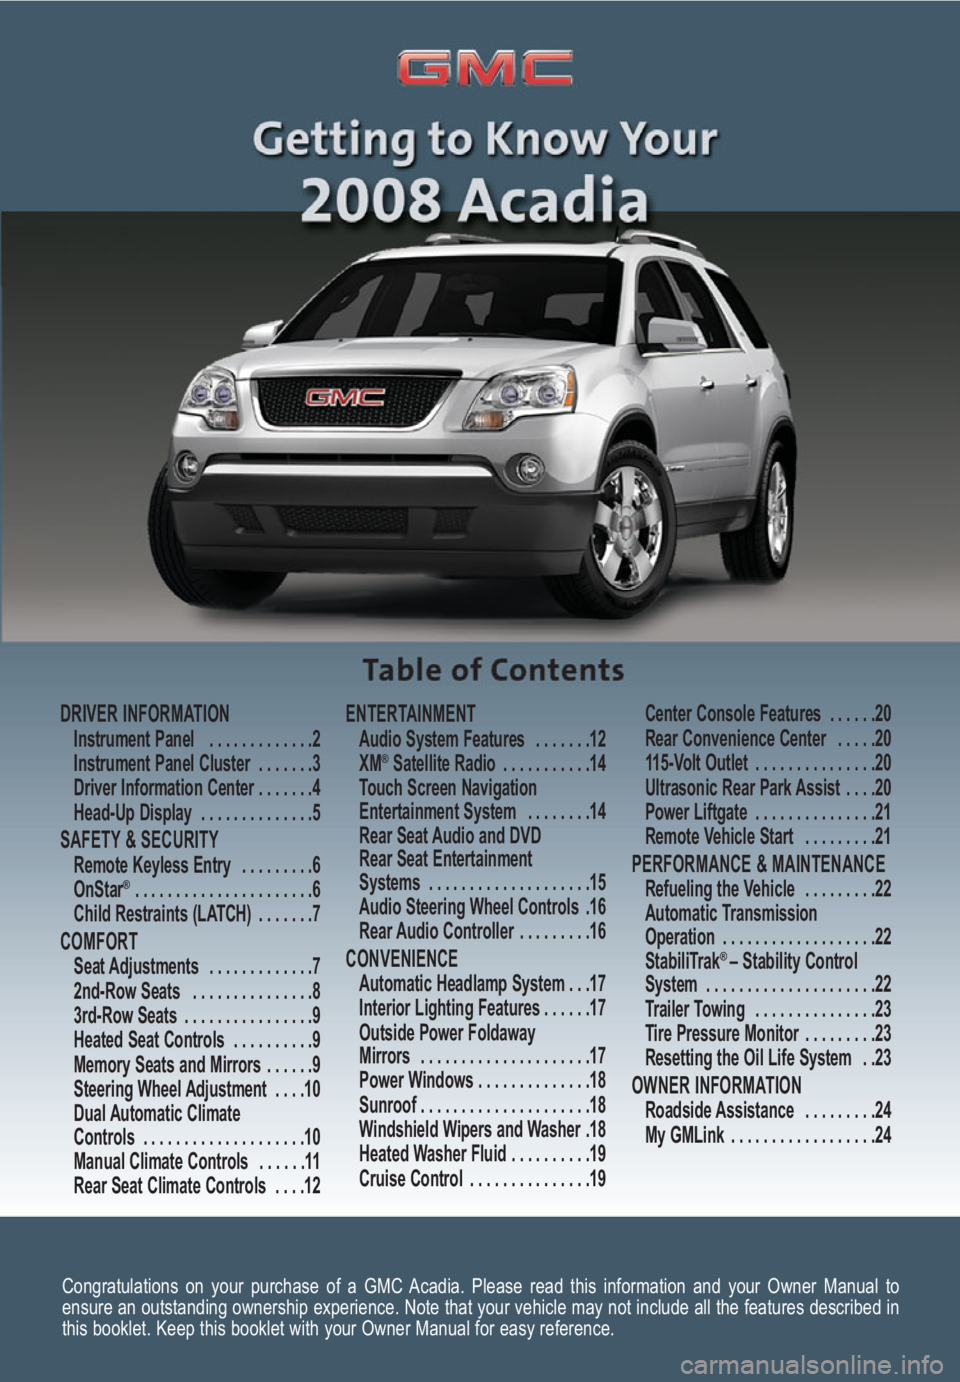 GMC ACADIA 2008  Get To Know Guide 